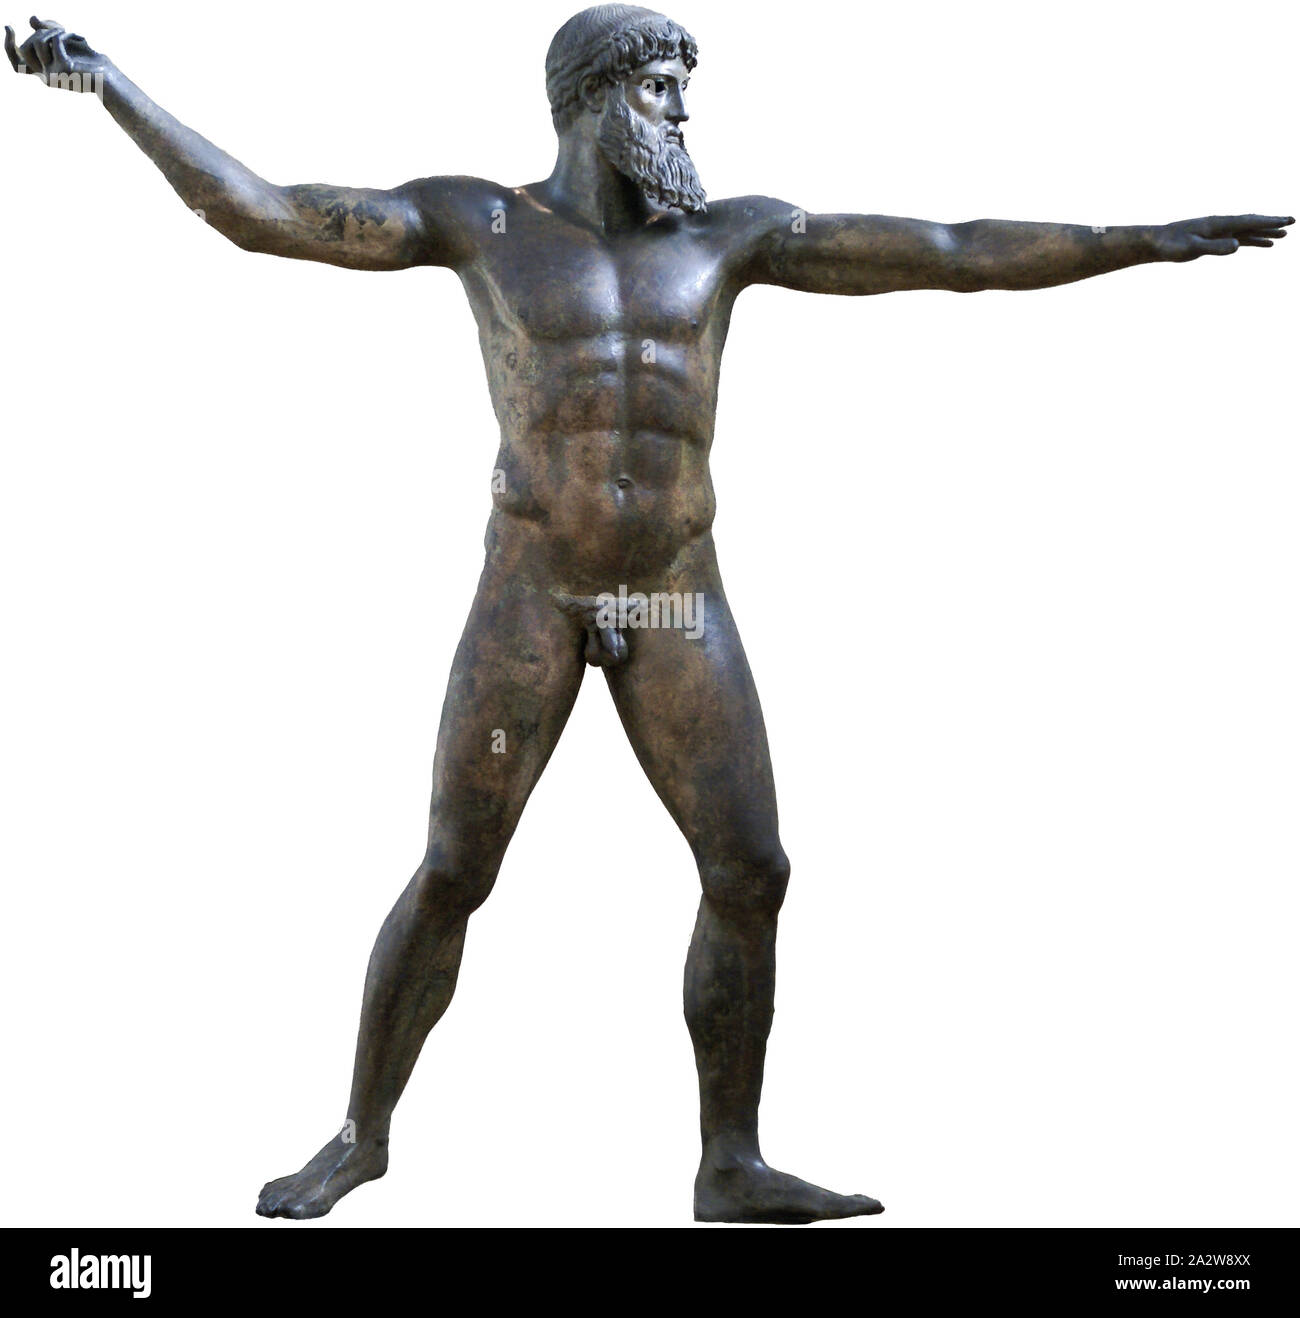 National Archaeological Museum - Athens, Greece. Statue of Zeus or Poseidon. White background. Stock Photo